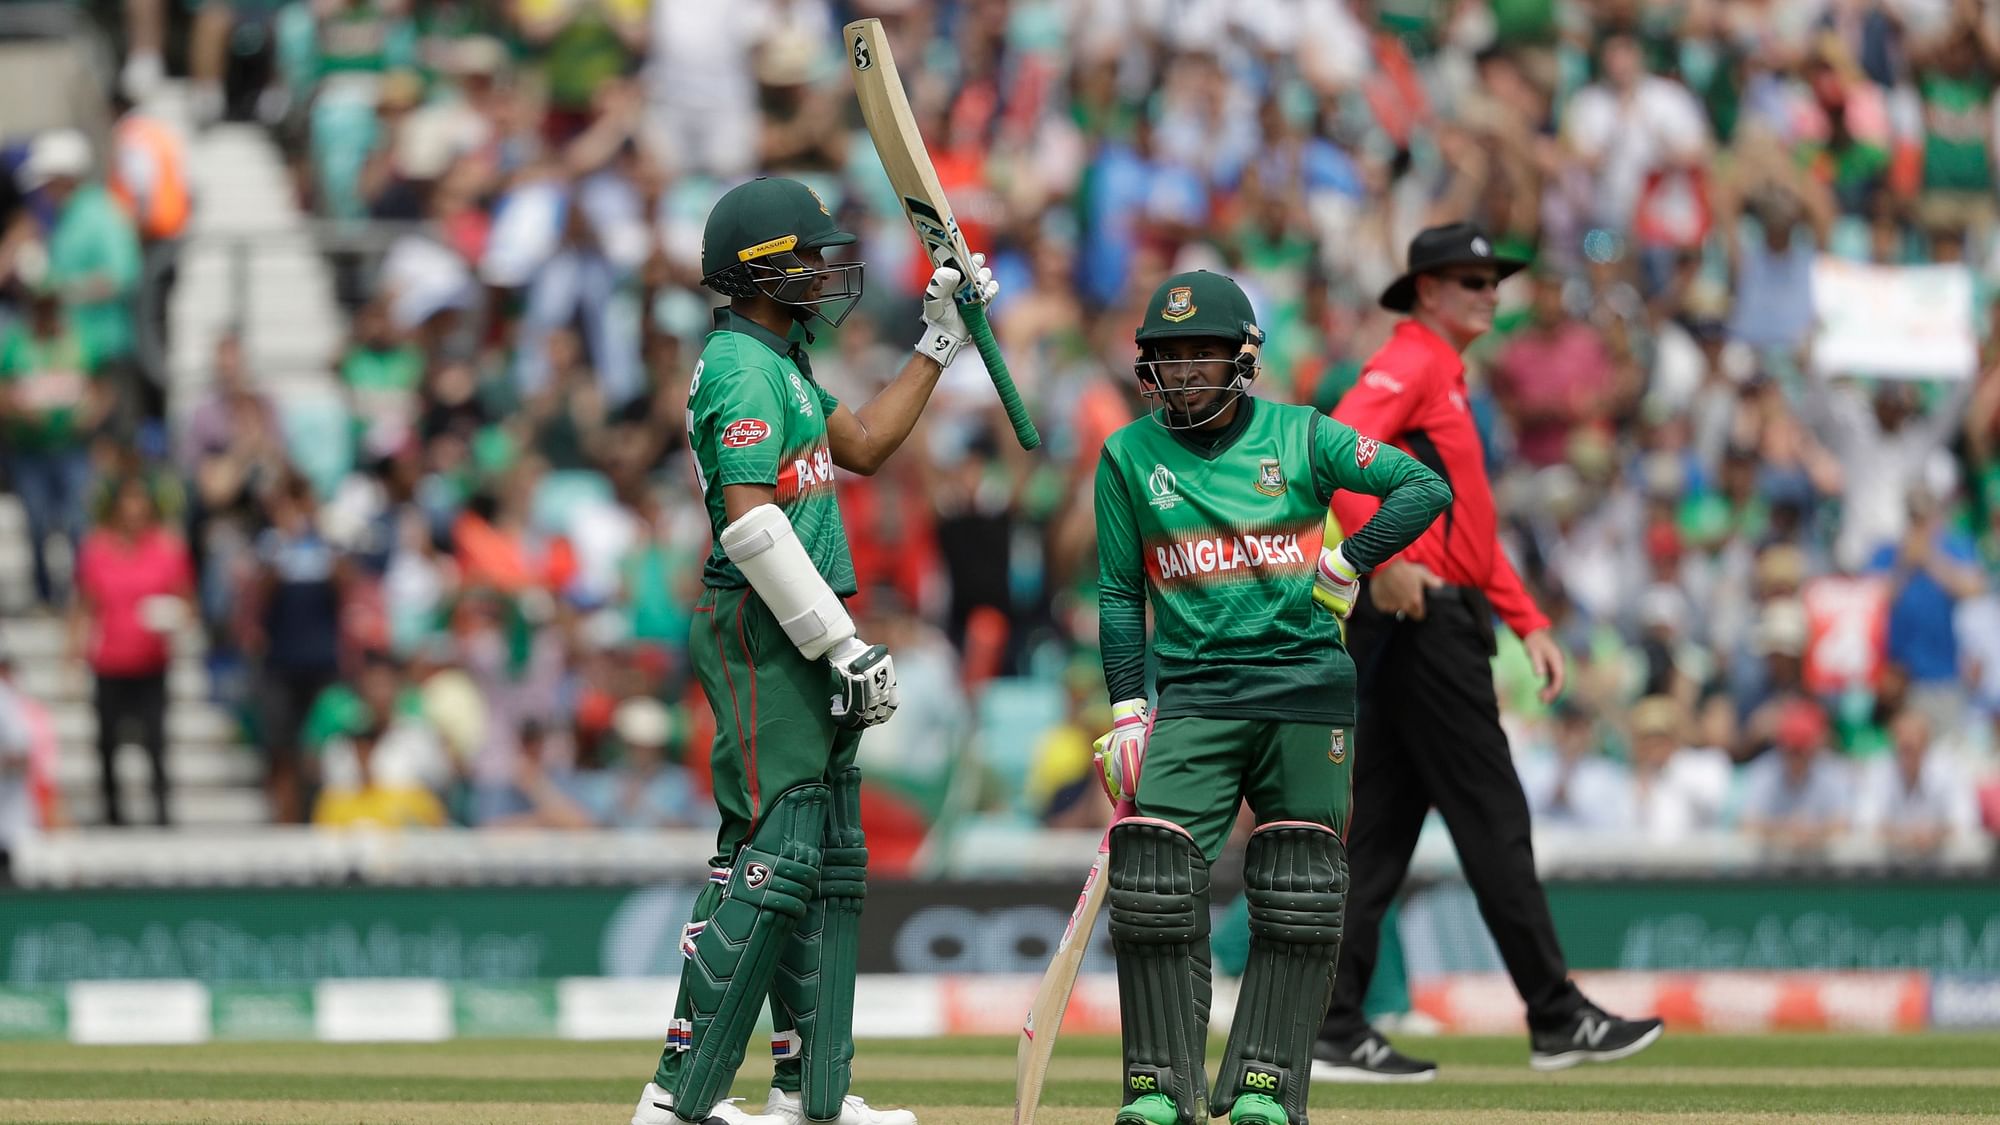 Bangladesh posted their highest ever ODI total on Sunday.